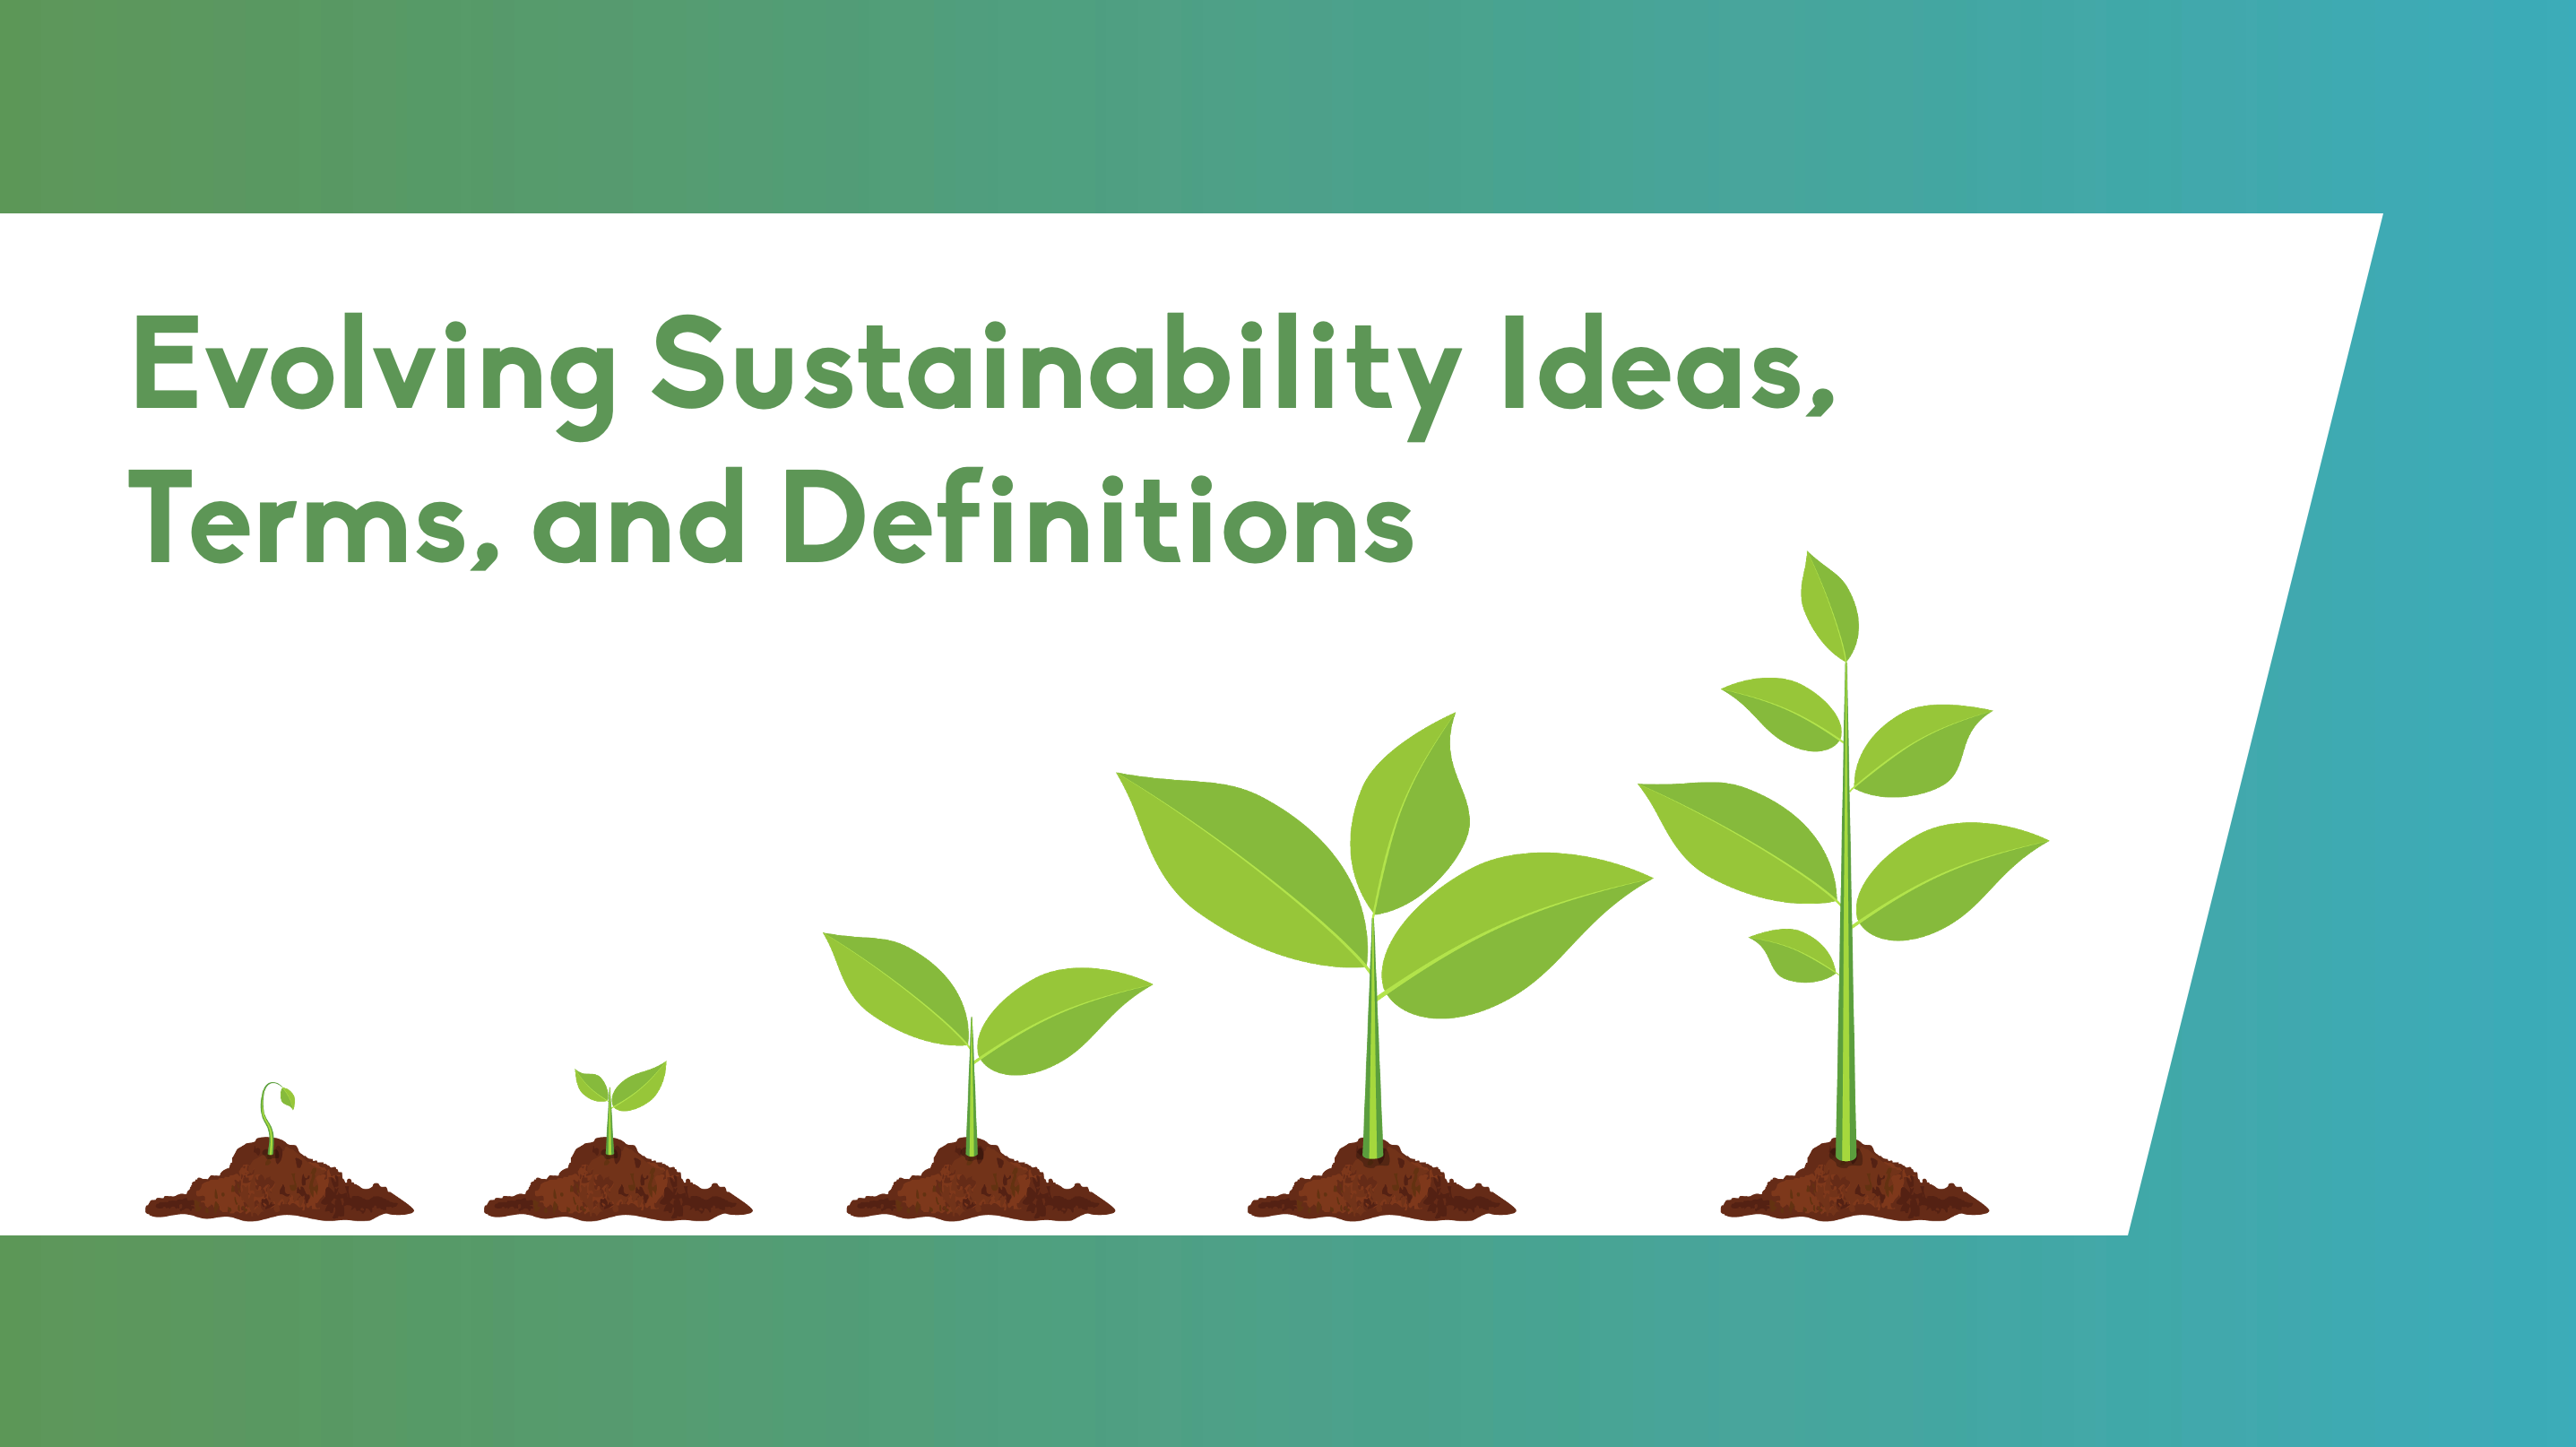 Evolving Sustainability Ideas, Terms, and Definitions